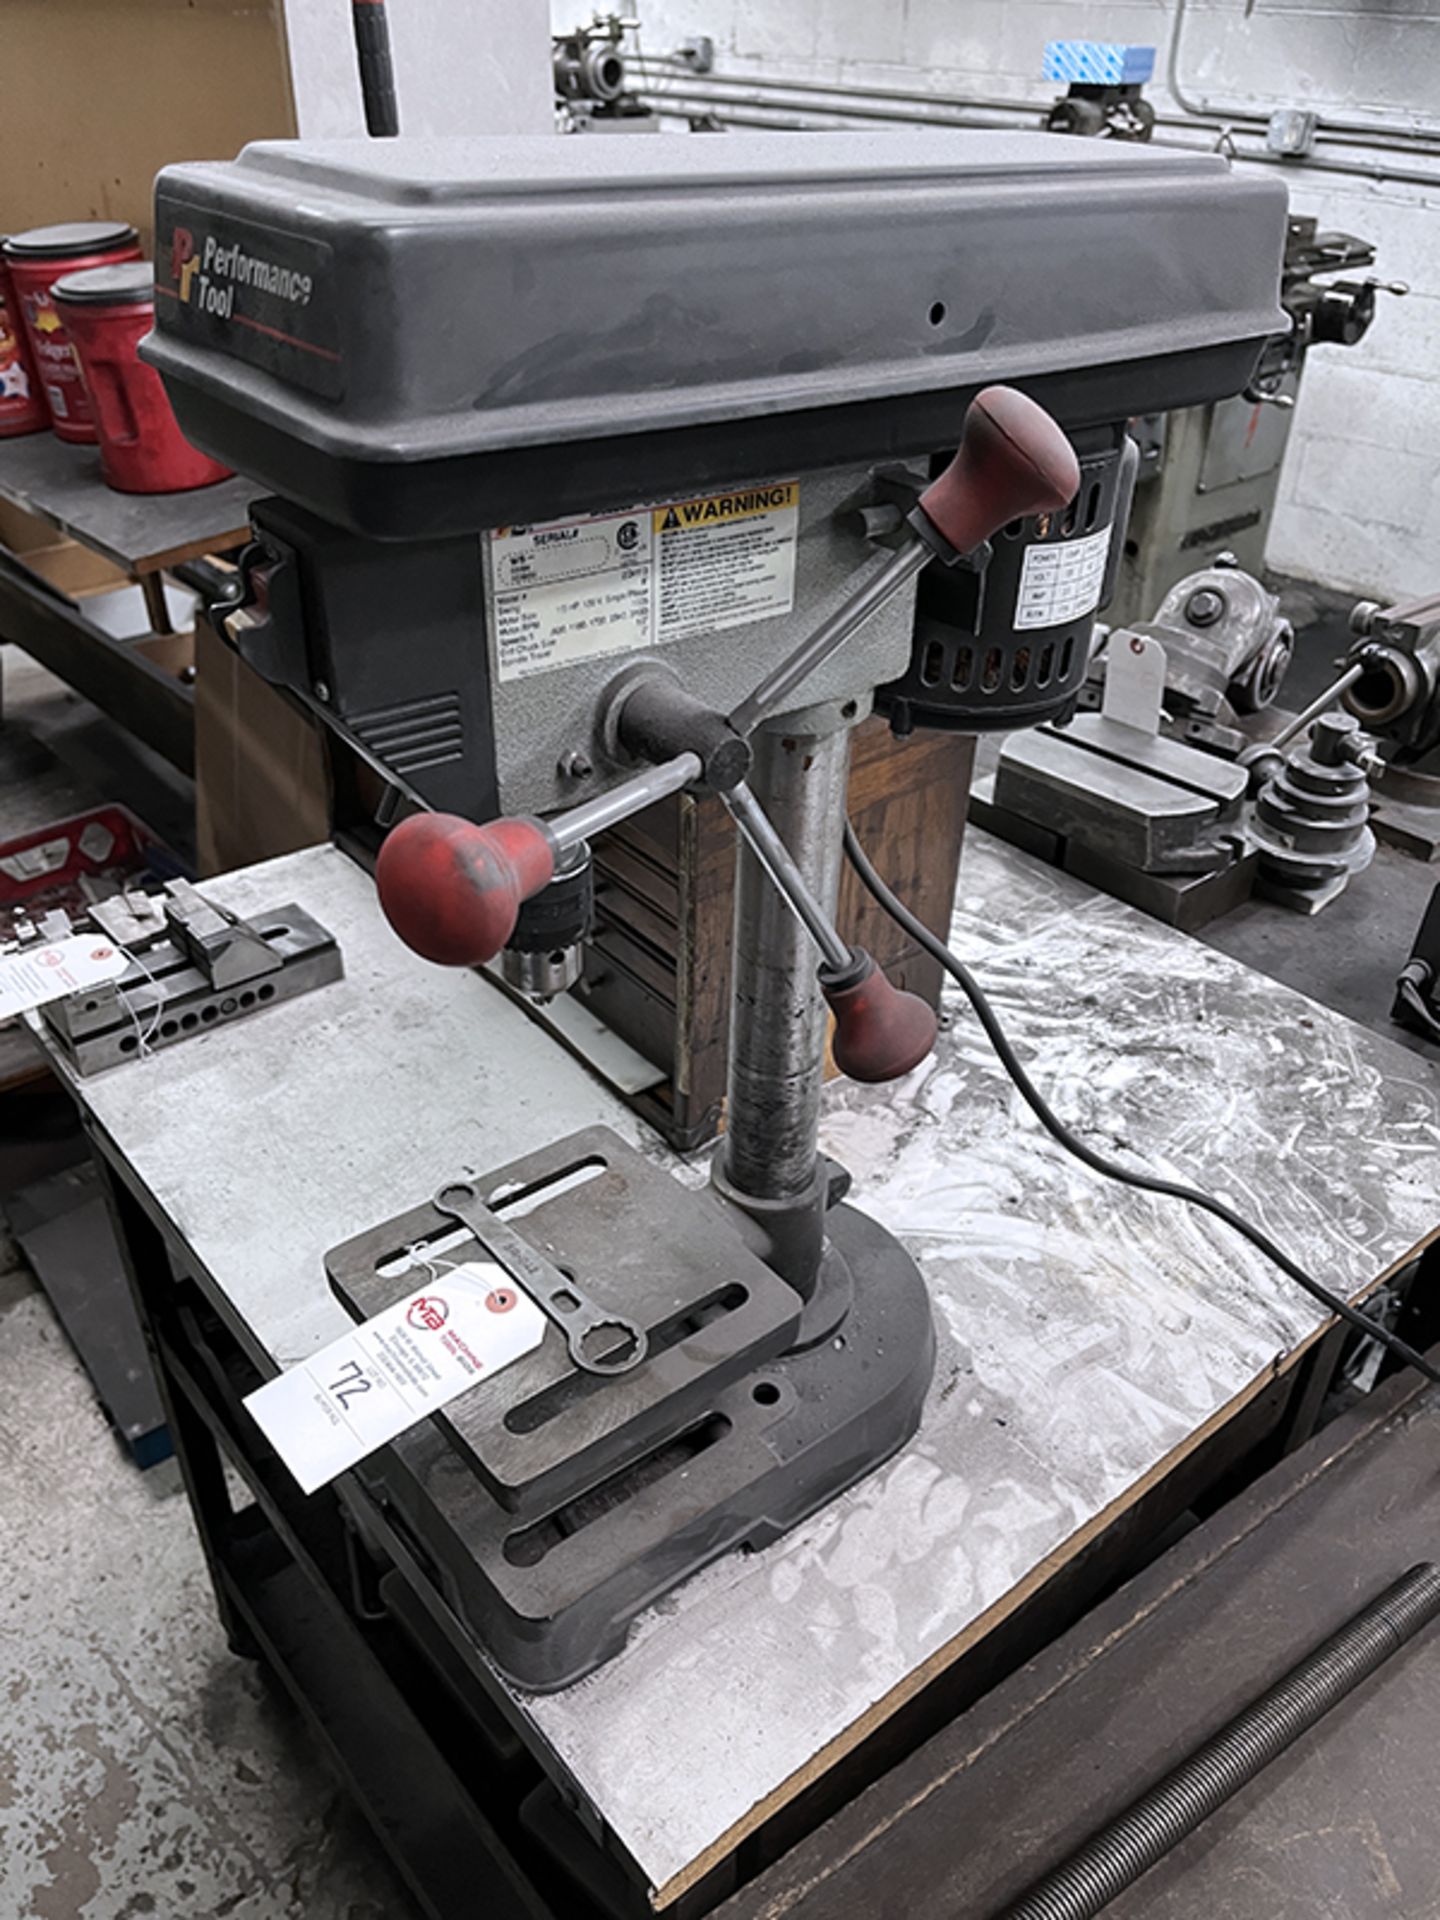 8" Performance Tool ZQ4113 Bench Type Drill Press - Image 2 of 6